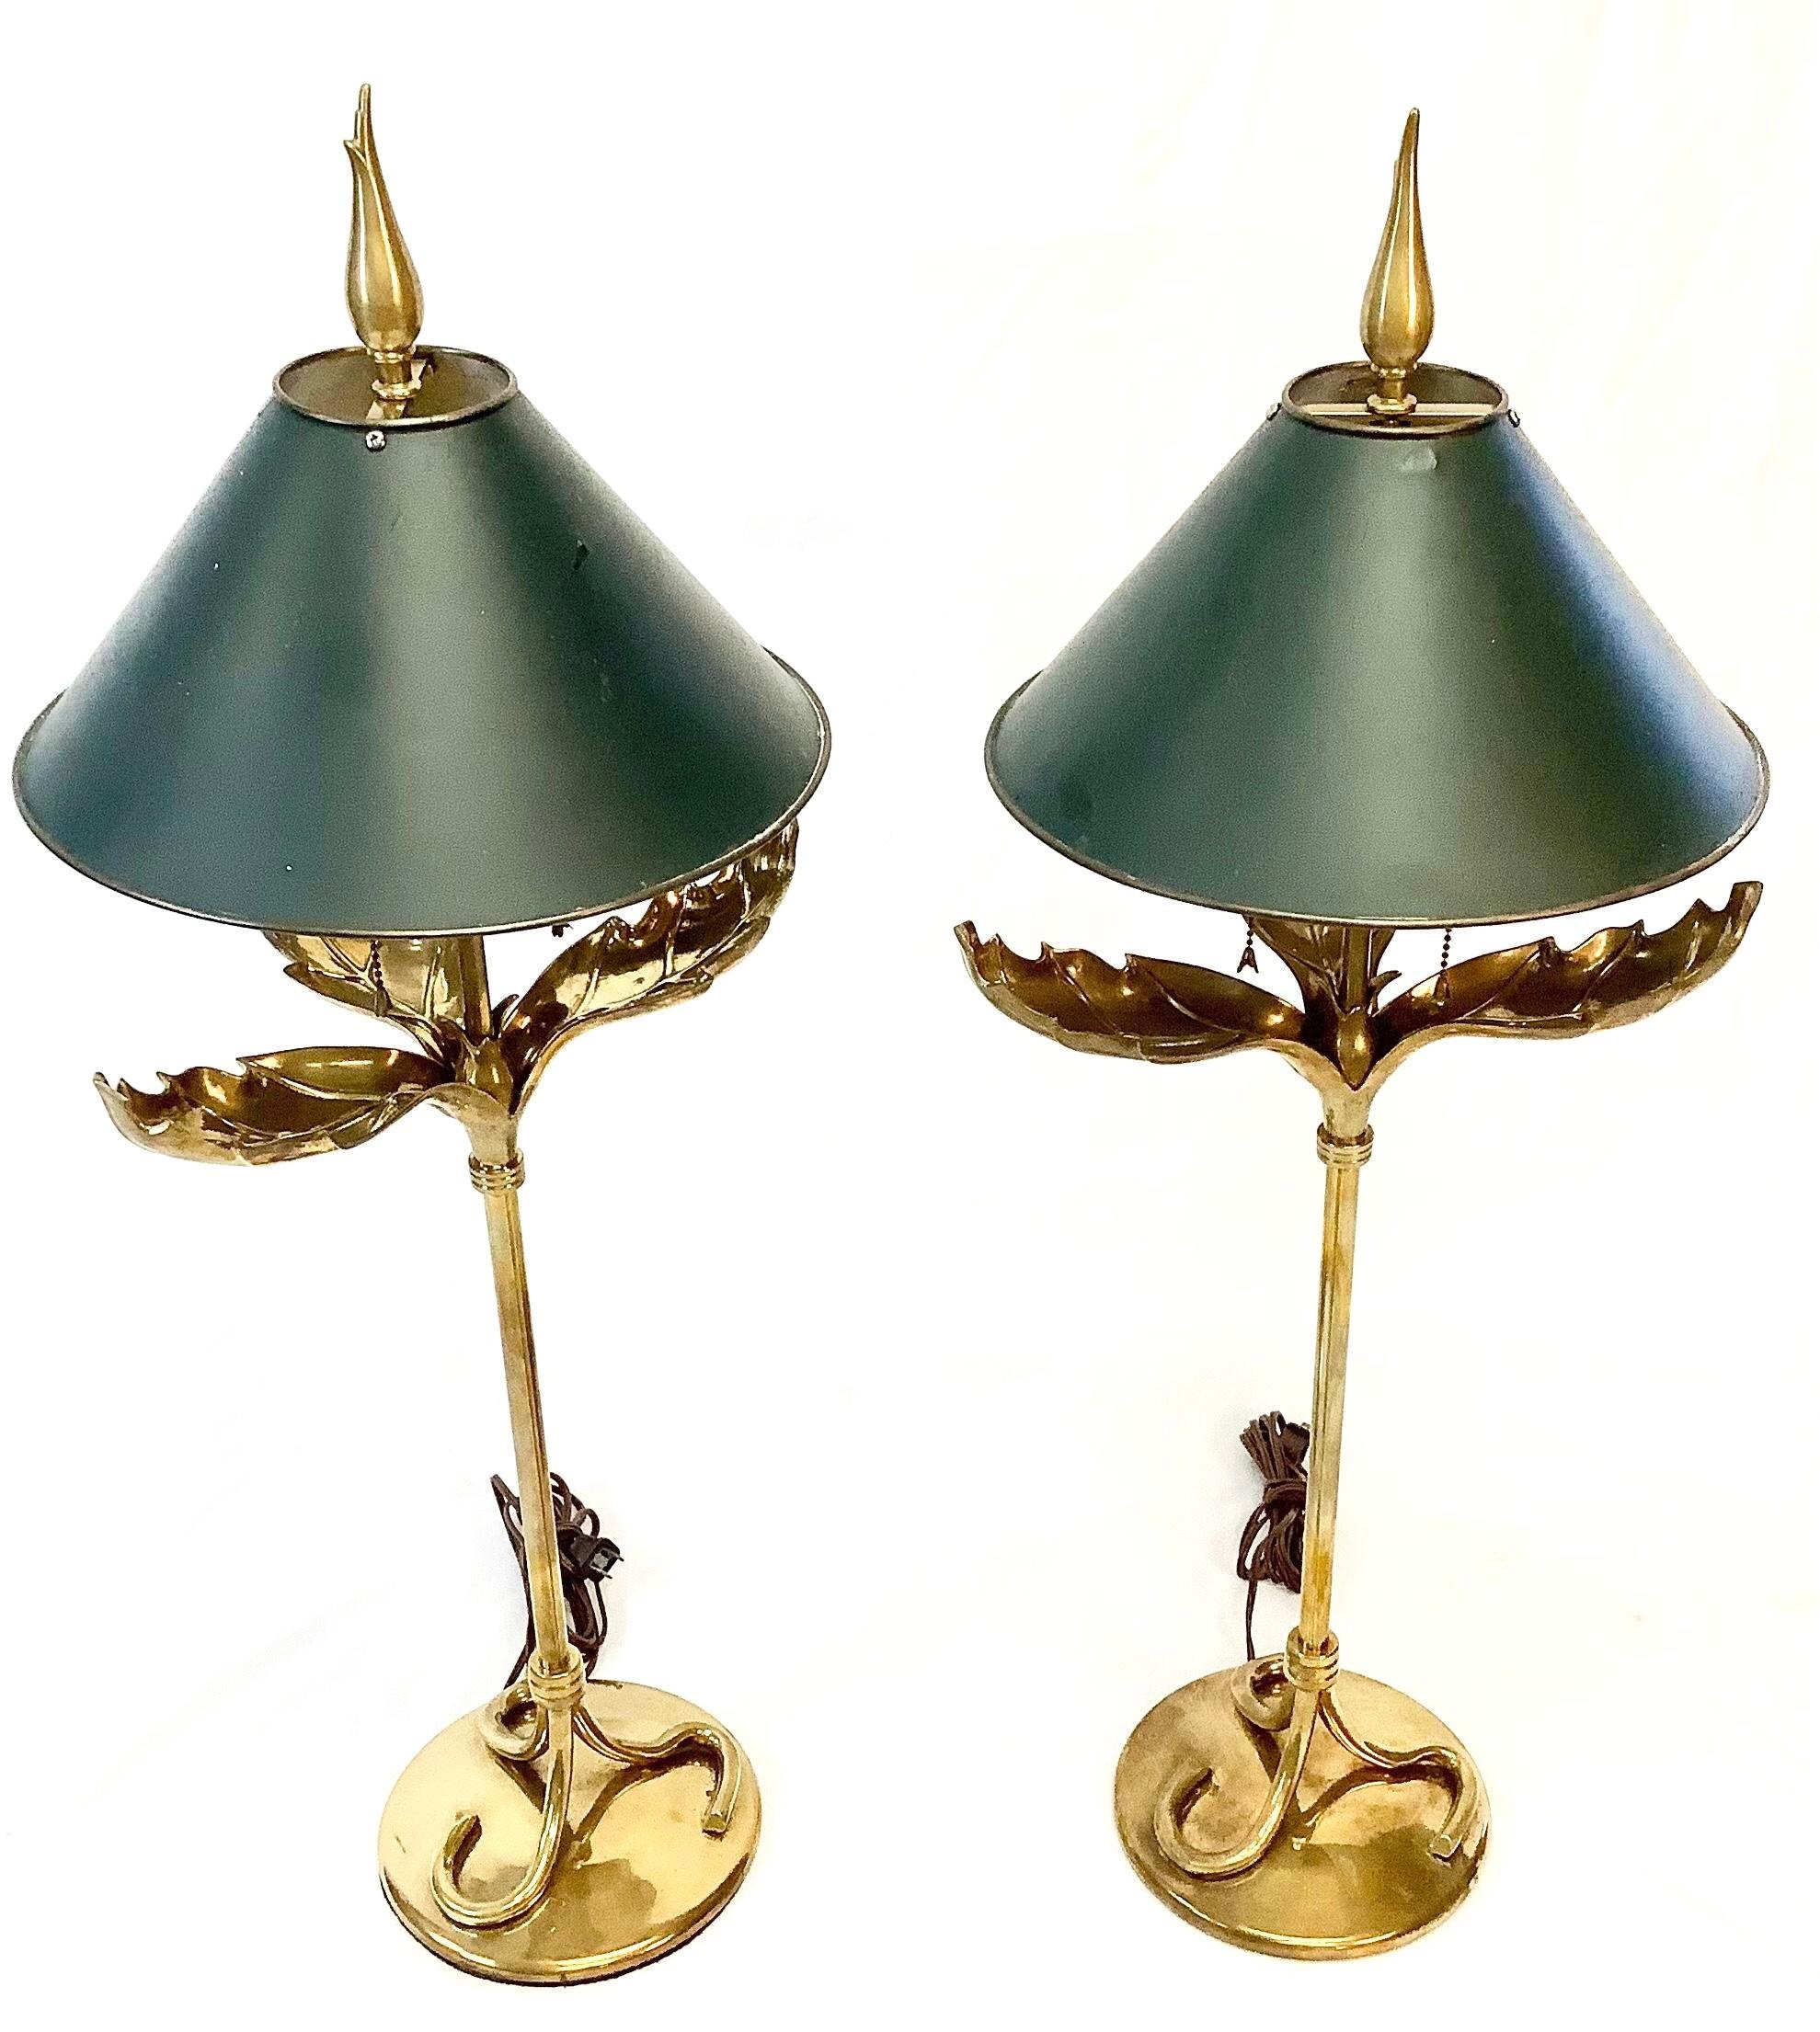 Tan France Auction Pick

Pair of Mid-Century Brass palm leaf lamps with dark green tole shades (shades included). Chapman Manufacturing sticker on bottom. Wired and in working order. Excellent condition with age appropriate wear.

Measures: 35.25